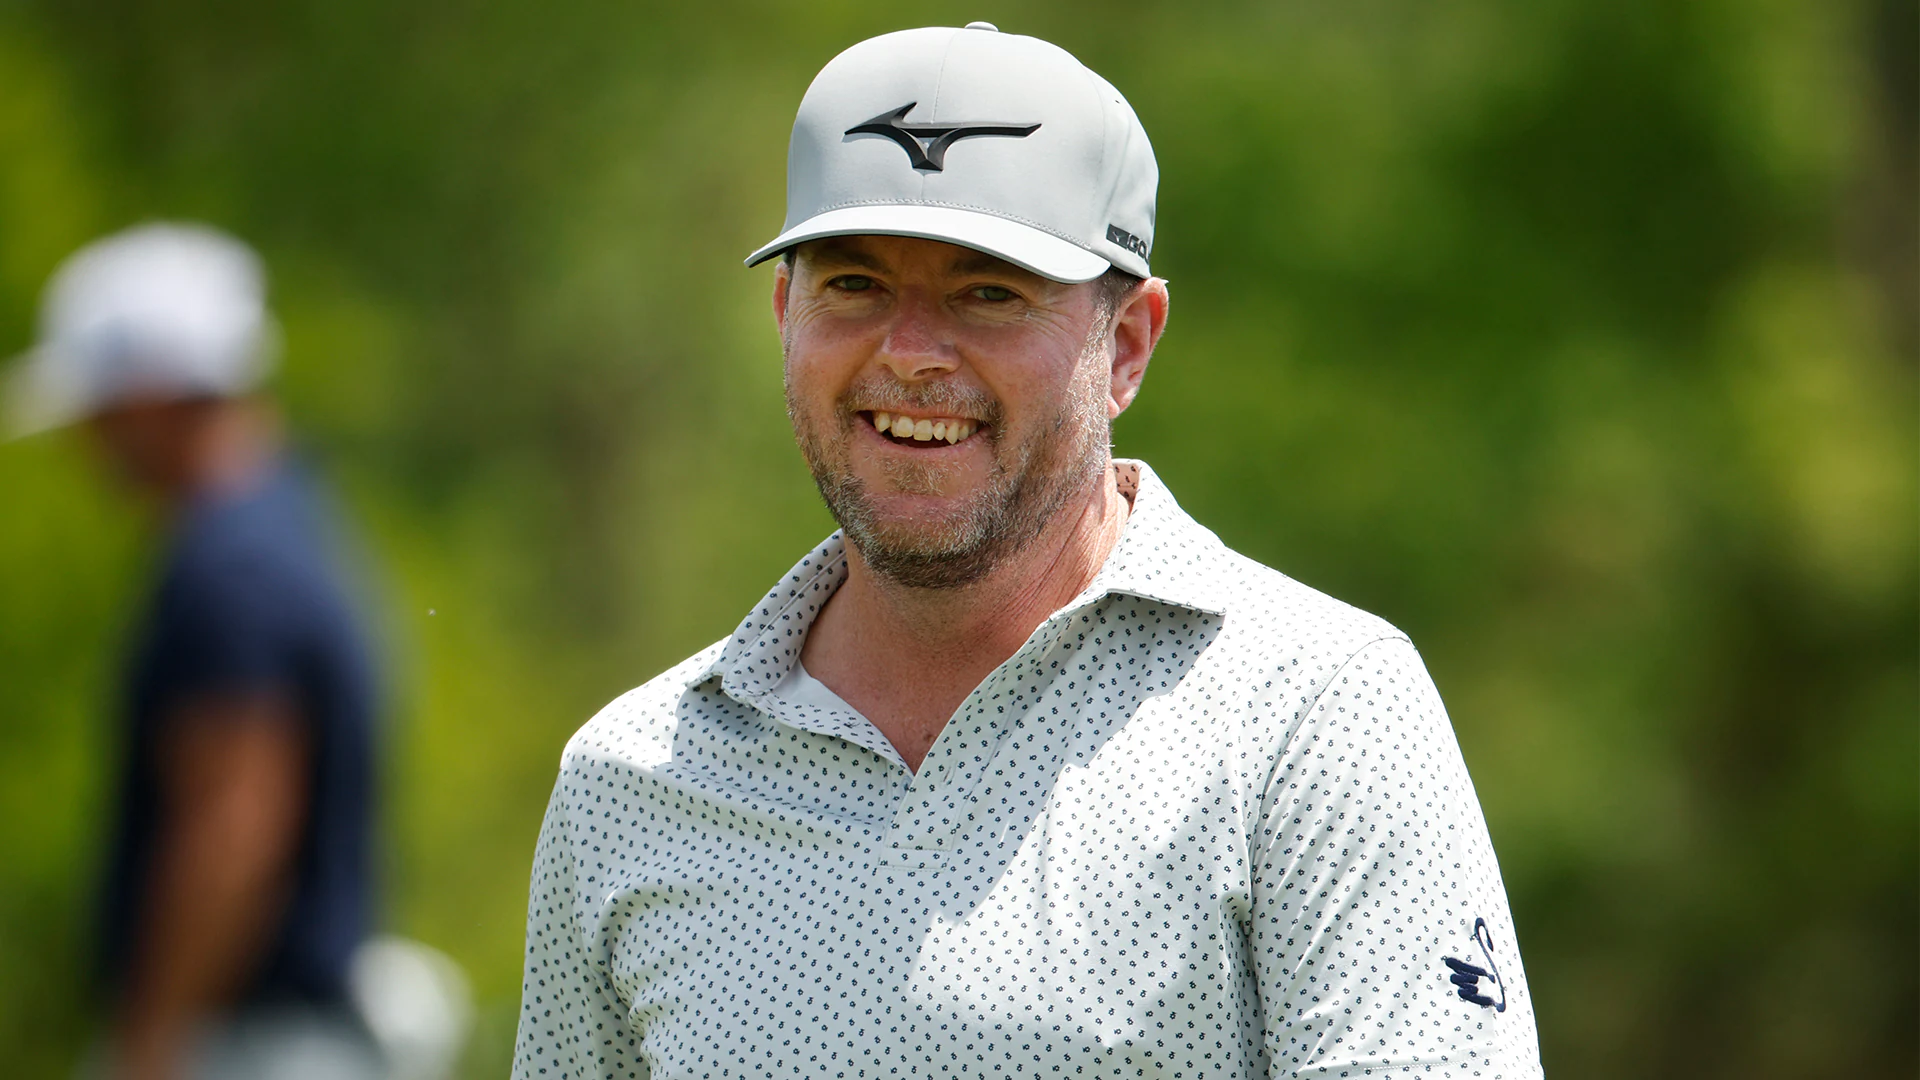 After Being Tied to LIV Series, Robert Garrigus in the Mix at PGA Tour’s Zurich Classic